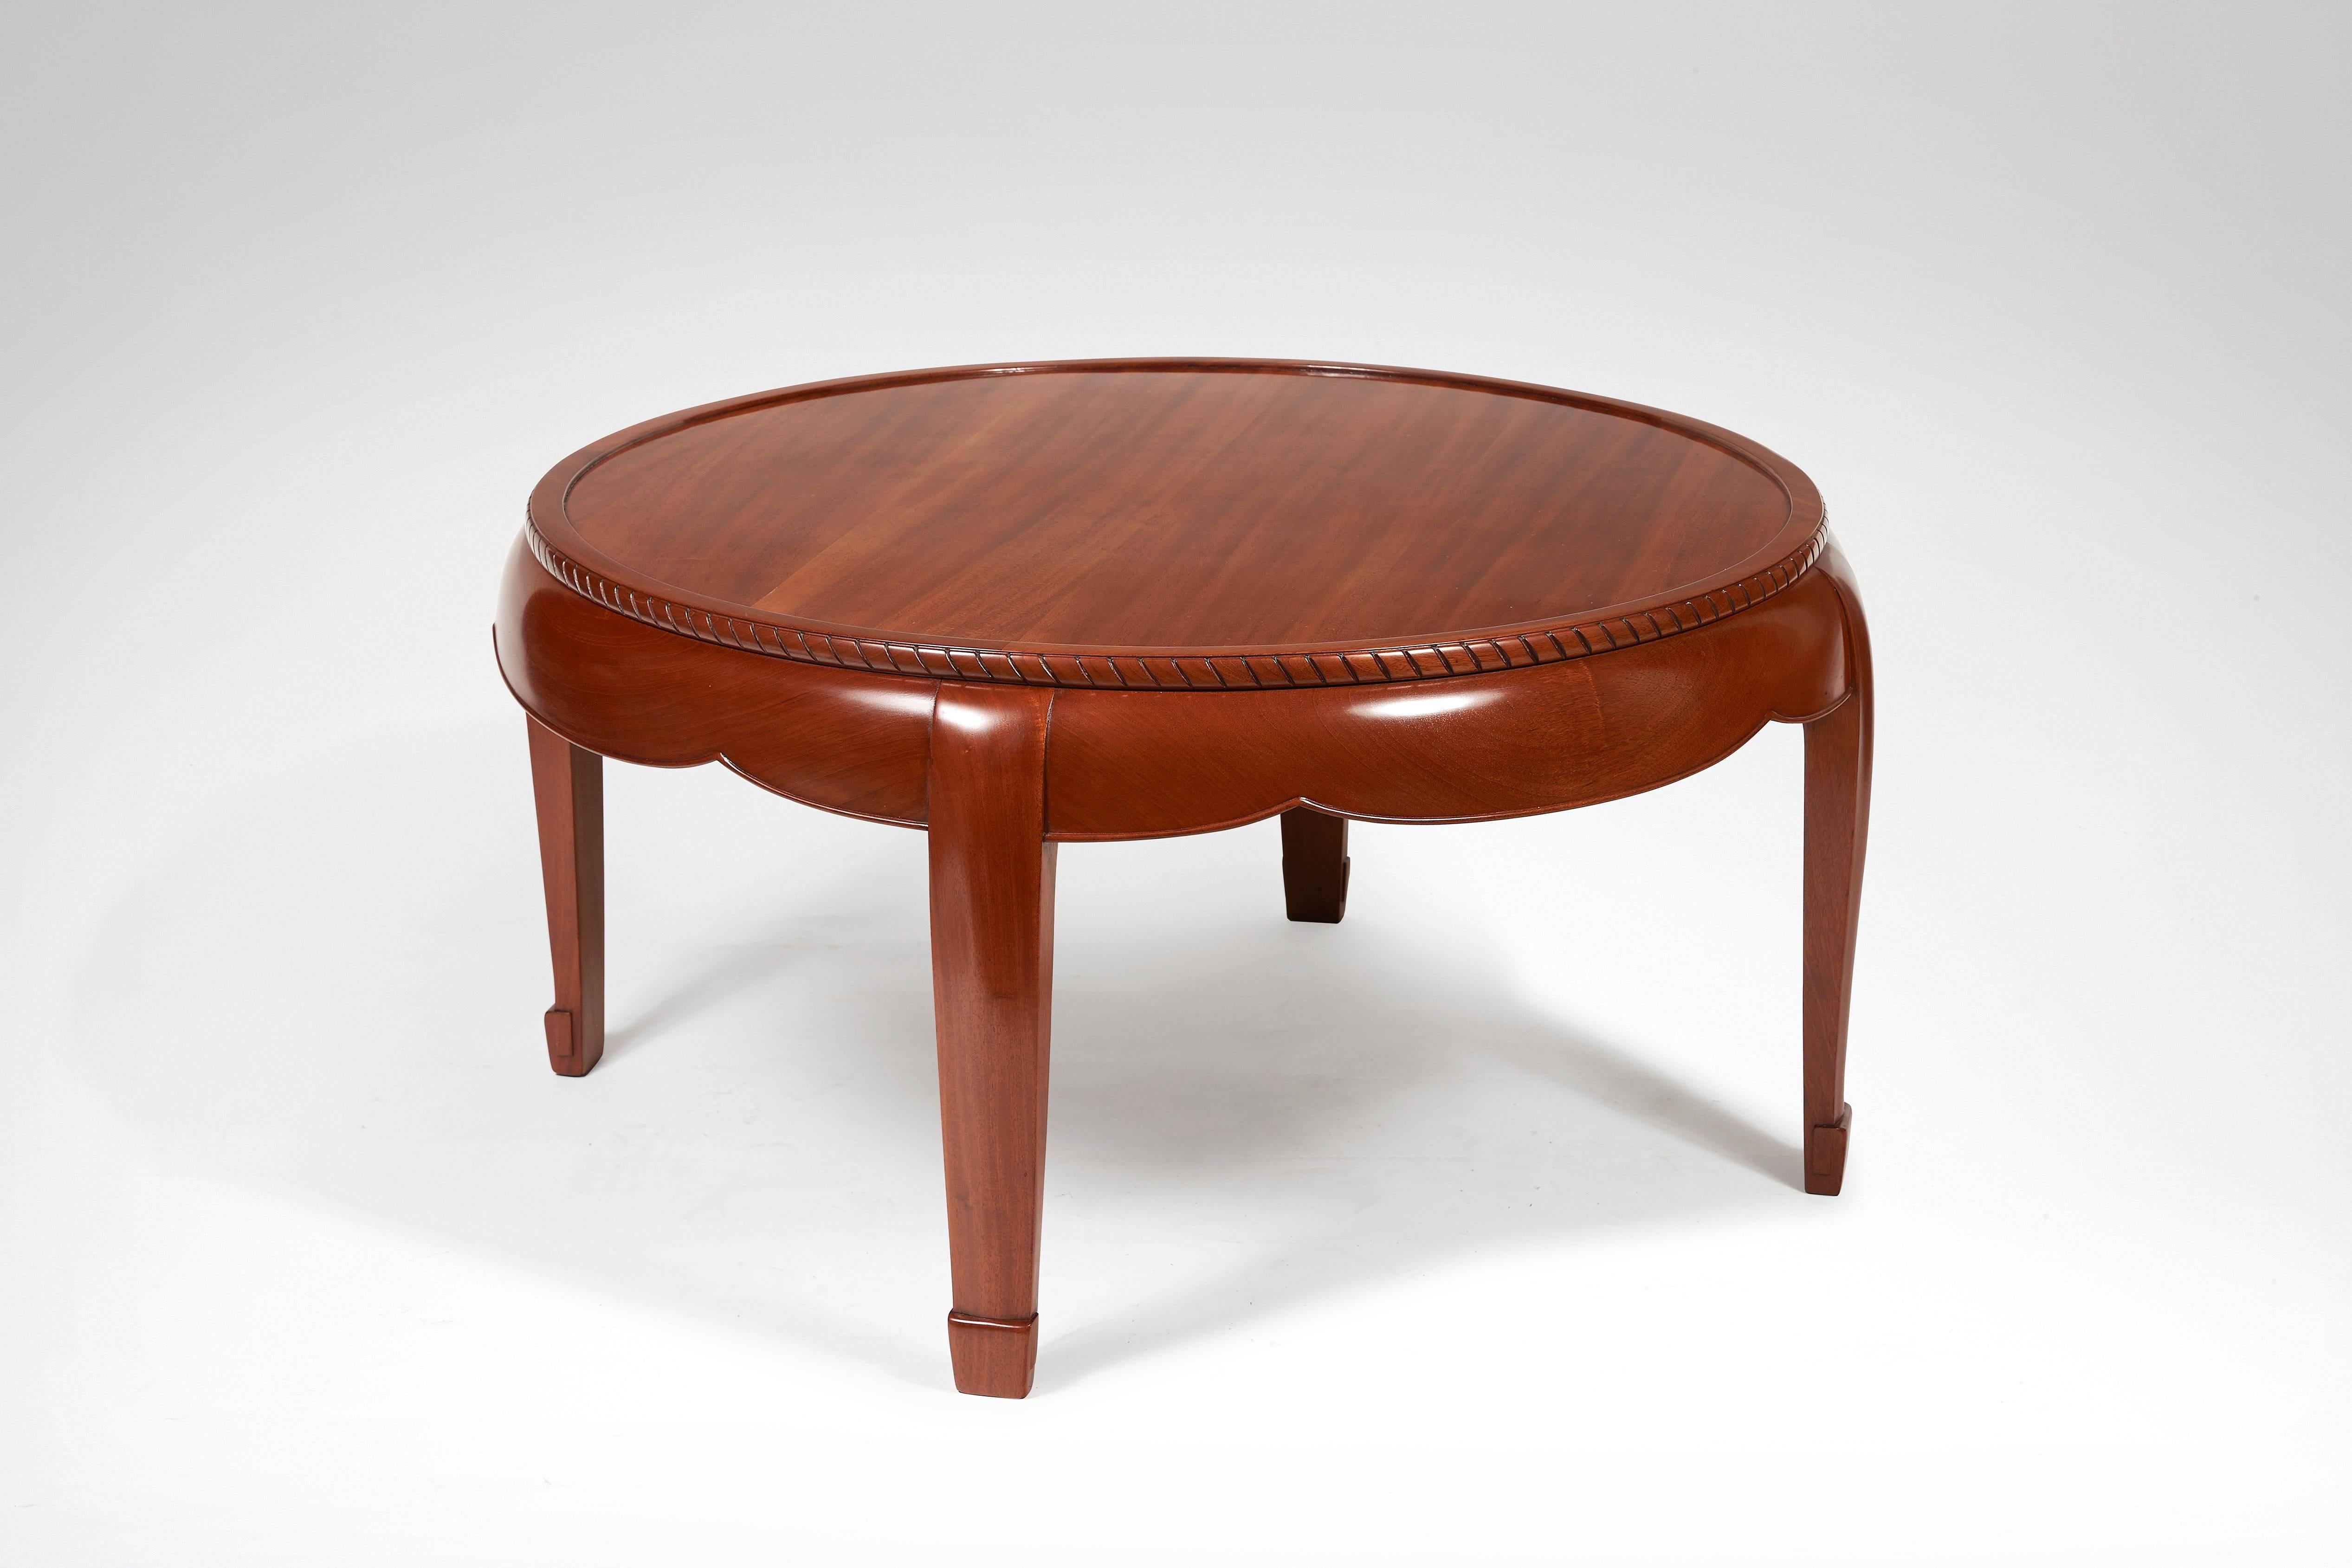 A Mahogany coffee table, circular glass top. Model referenced as #256 in the list of models created and entered in the reference book. Model designed for M. Gobert circa 1922-1923.

- Florence Camard, 